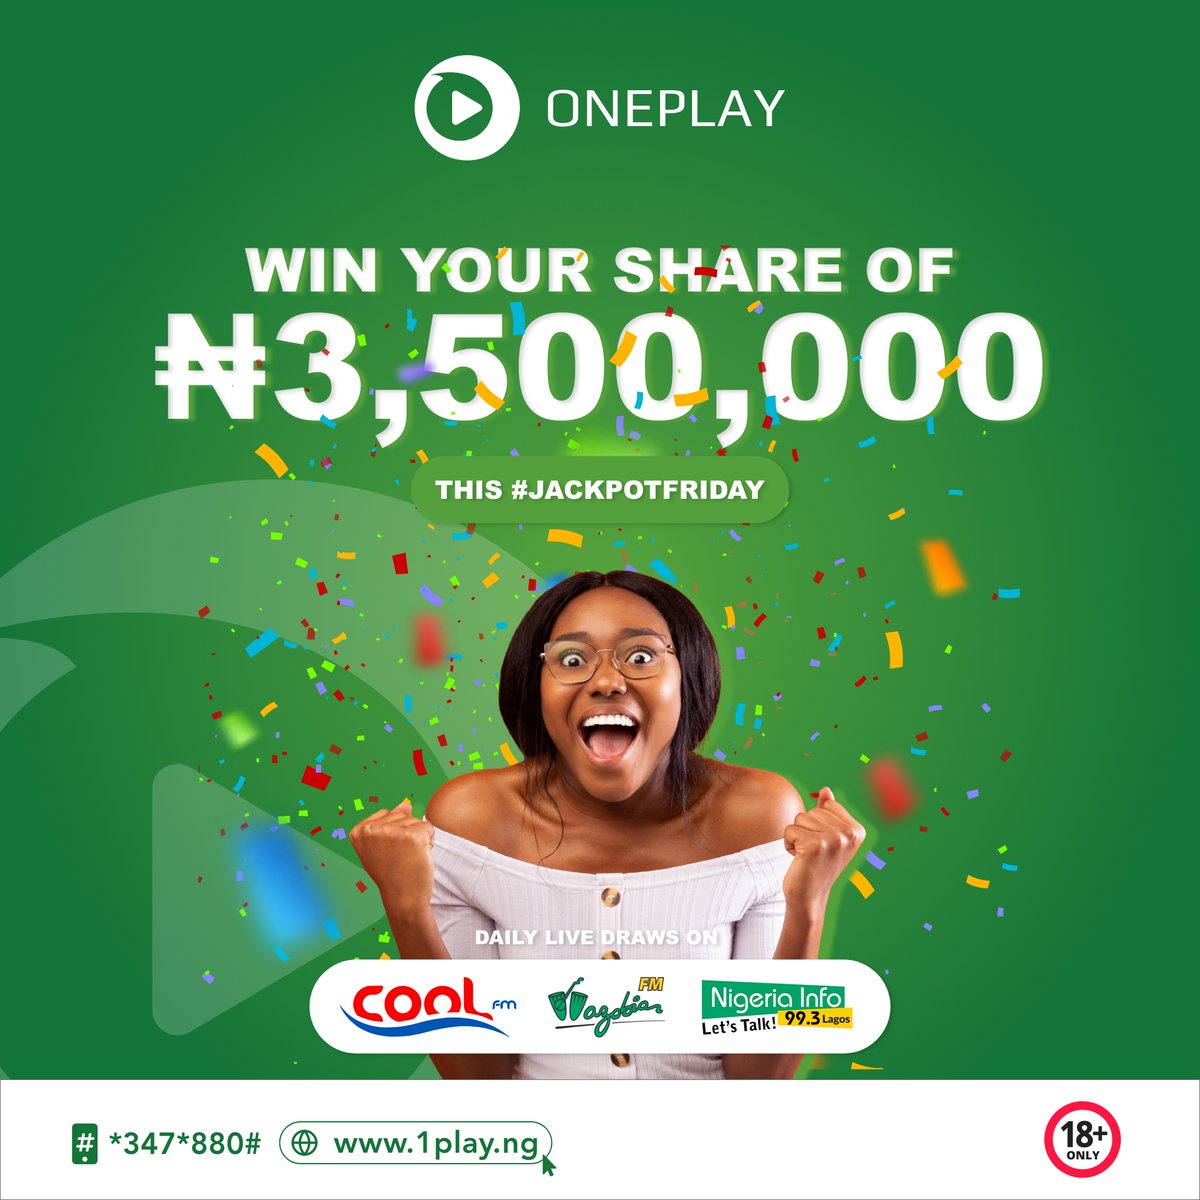 #JackpotFriday just got BIGGER & Better! ₦3,500,000 up for grabs today! 🤯🤯🤯 With 2 Guaranteed Millionaires today, you have to be in it to win it!!!  💸💸💸

#1Play #JustDeyPlay #JustBelieve